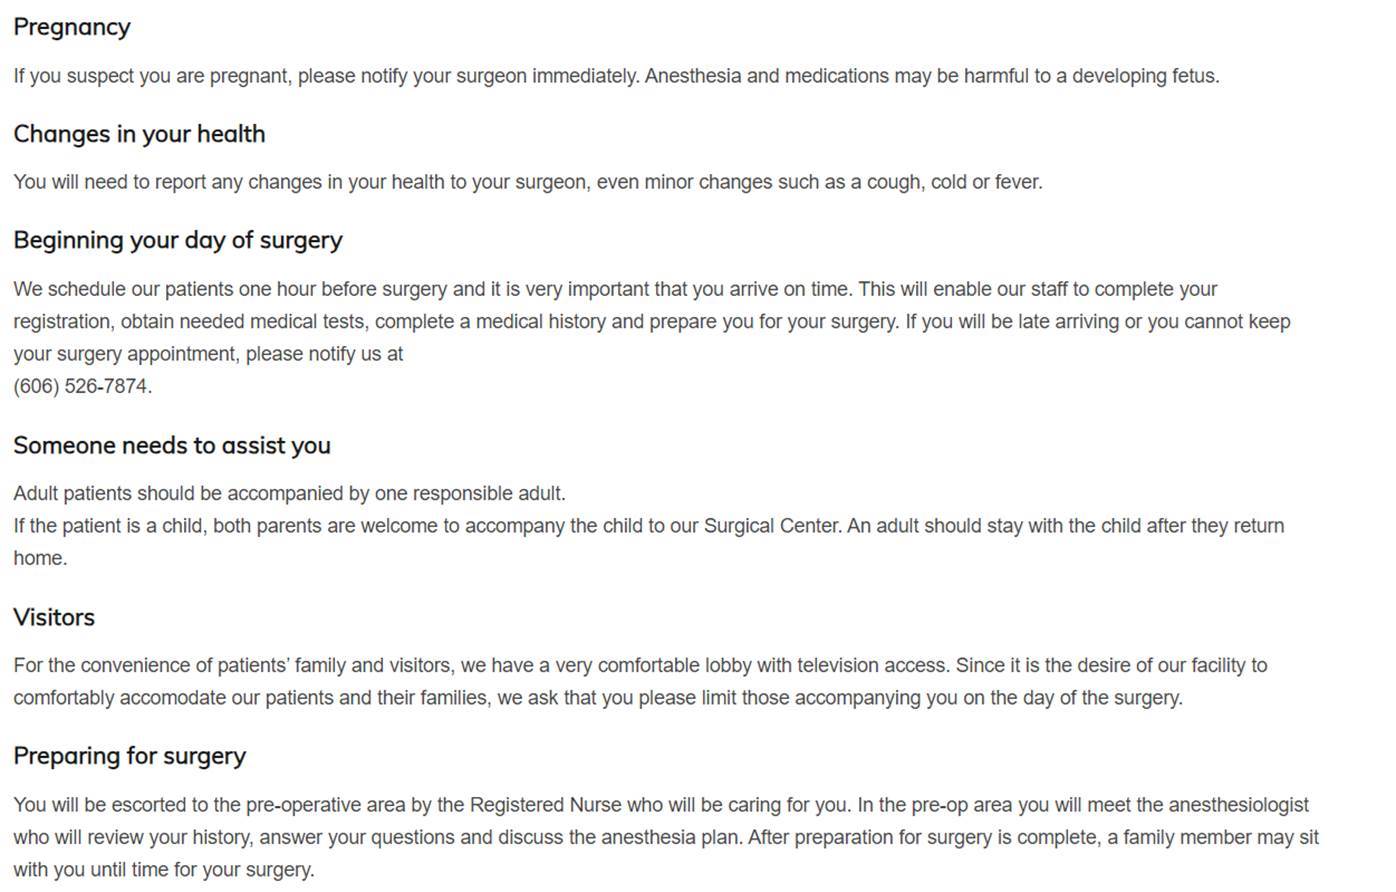 A screenshot of a medical form

Description automatically generated